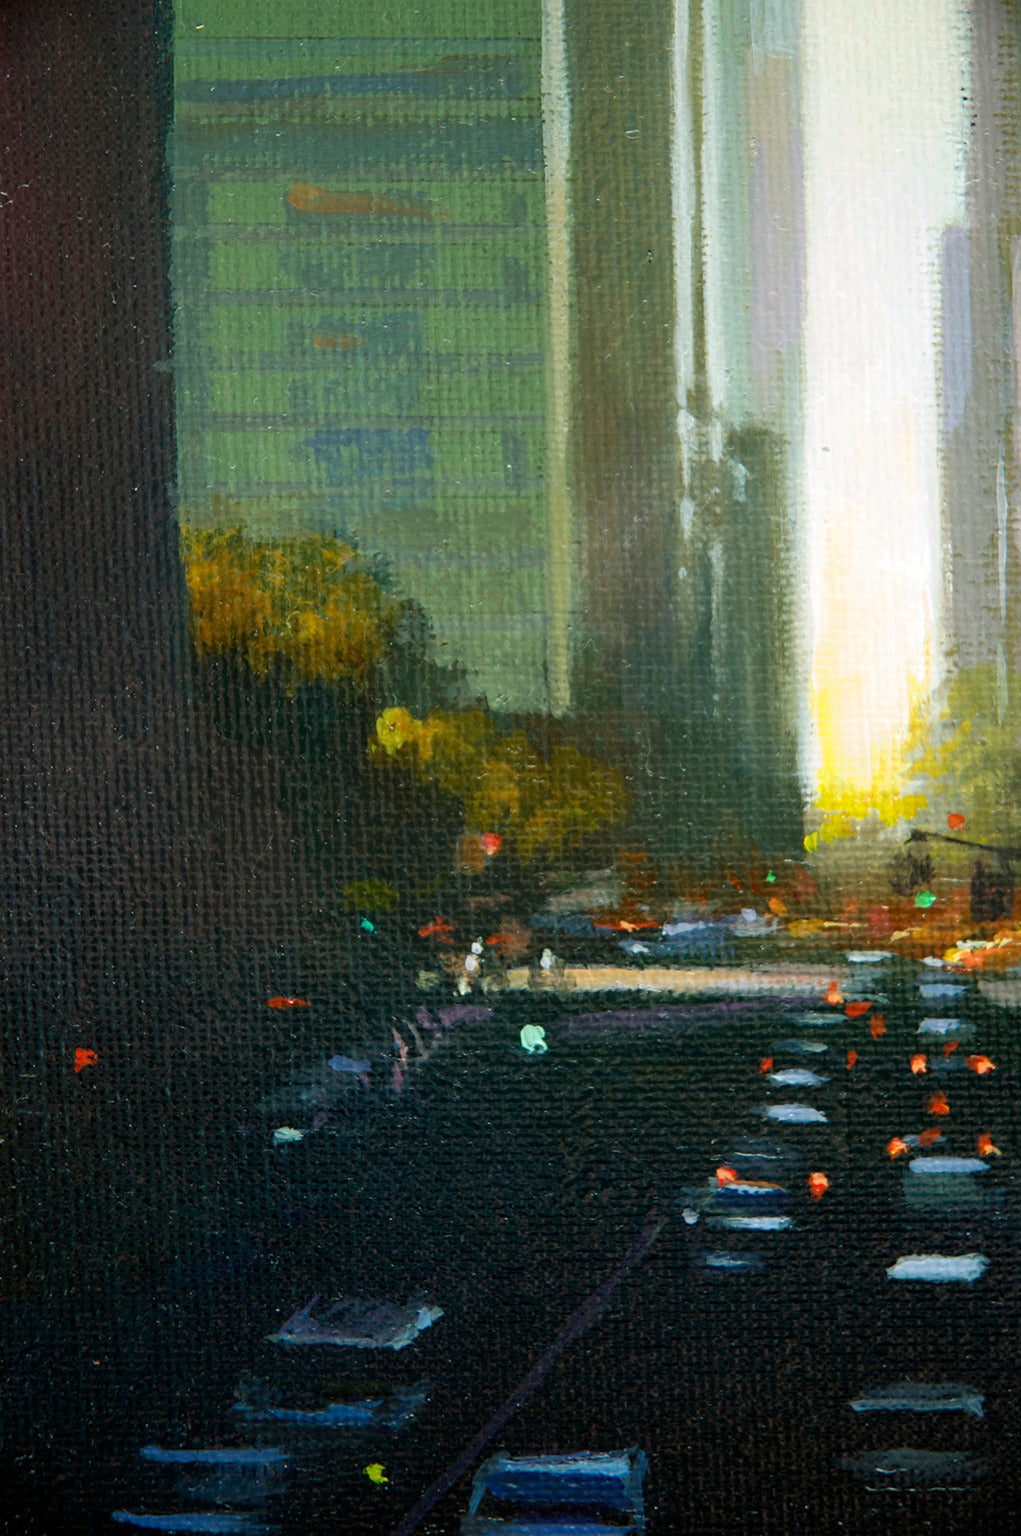 City Vista - Painting by Ed Little